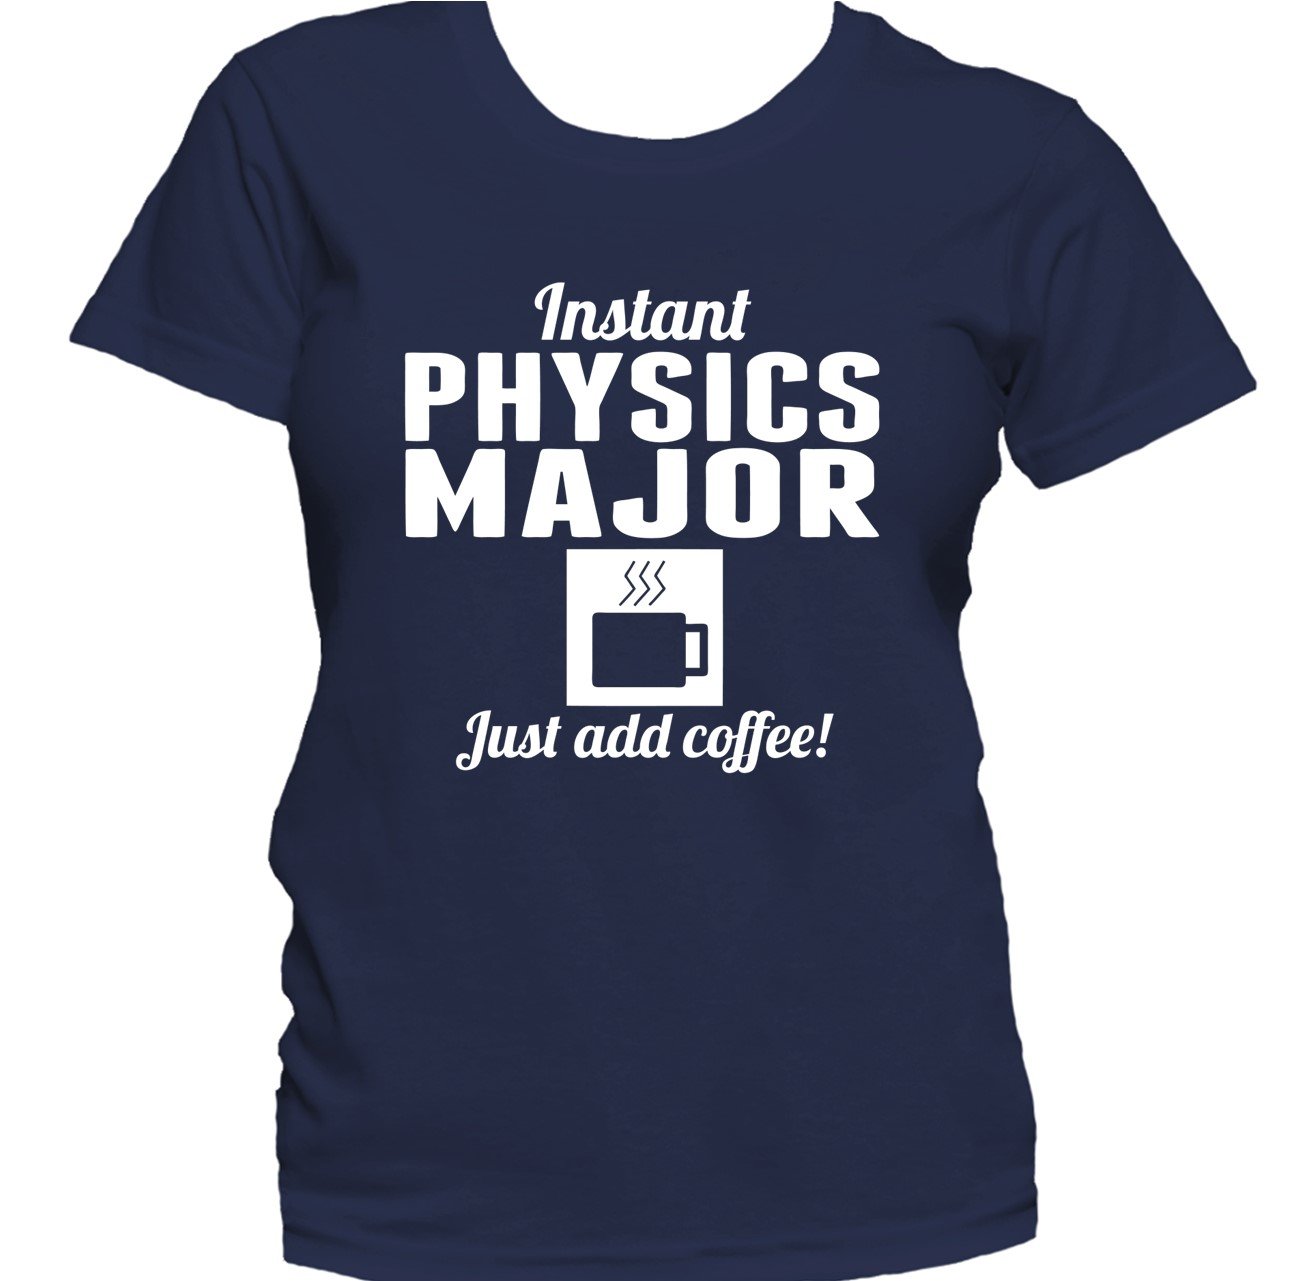 Instant Physics Major Just Add Coffee Funny Women's T-Shirt